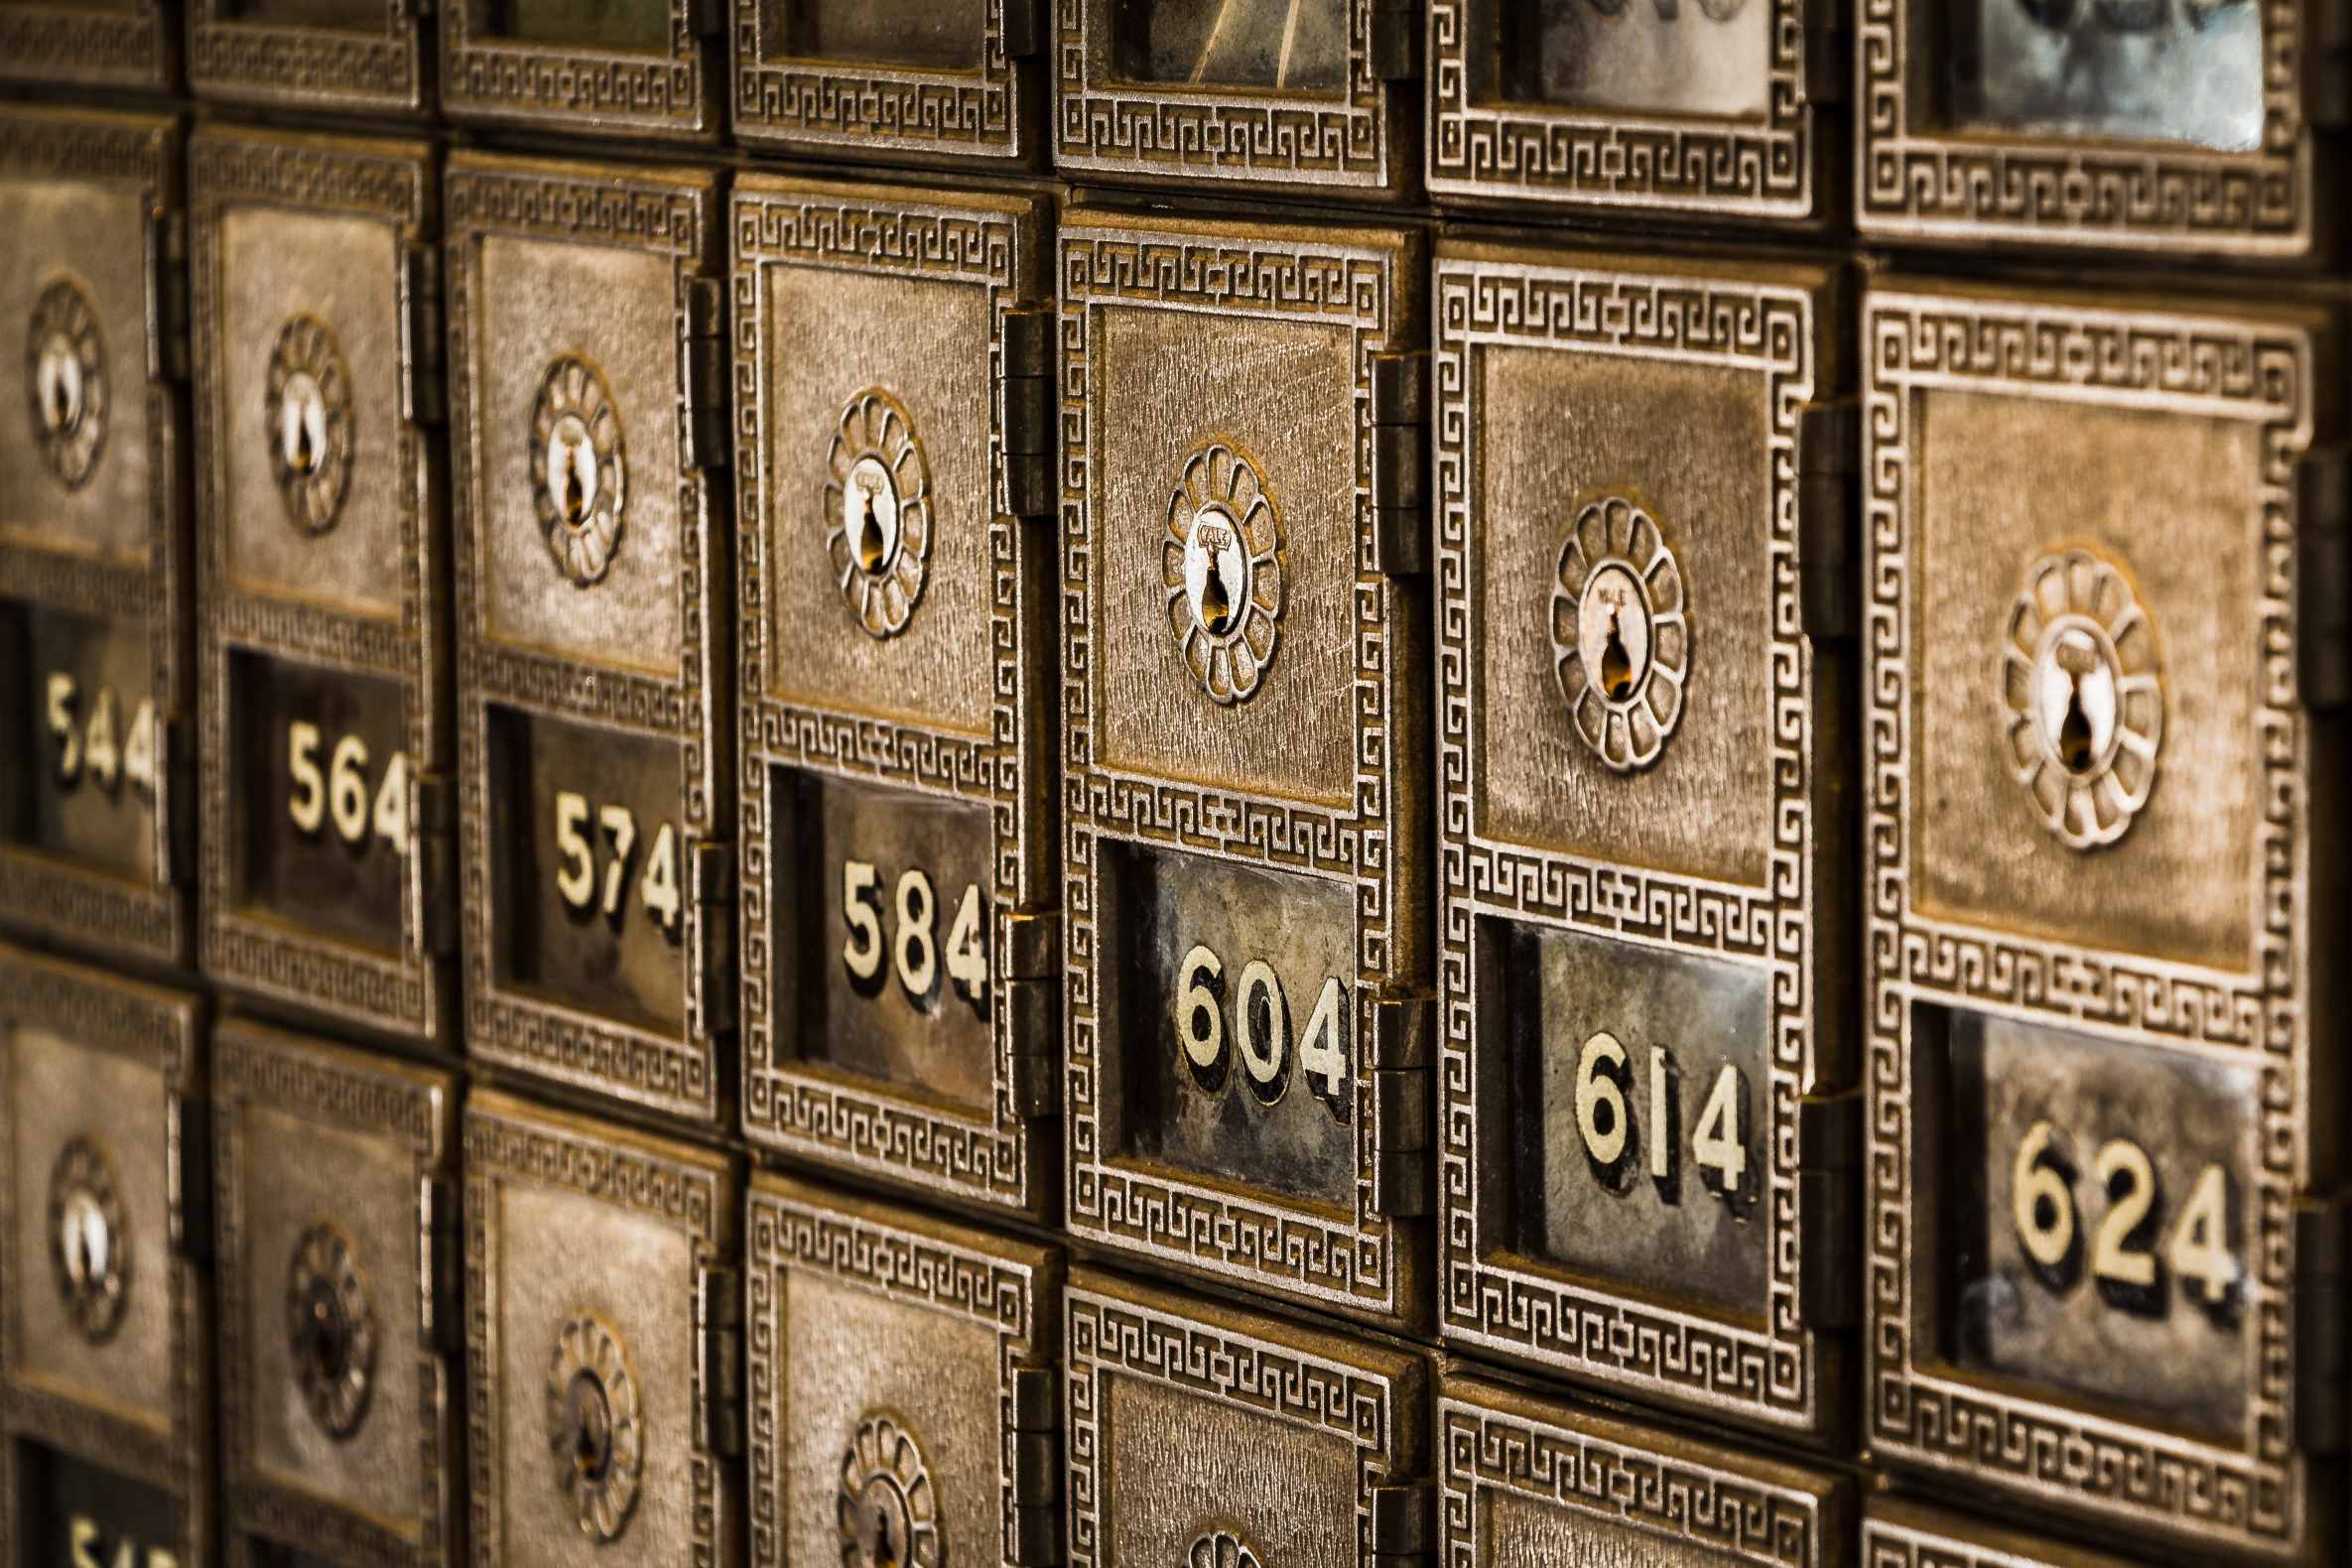 High Security Safety Deposit Boxes